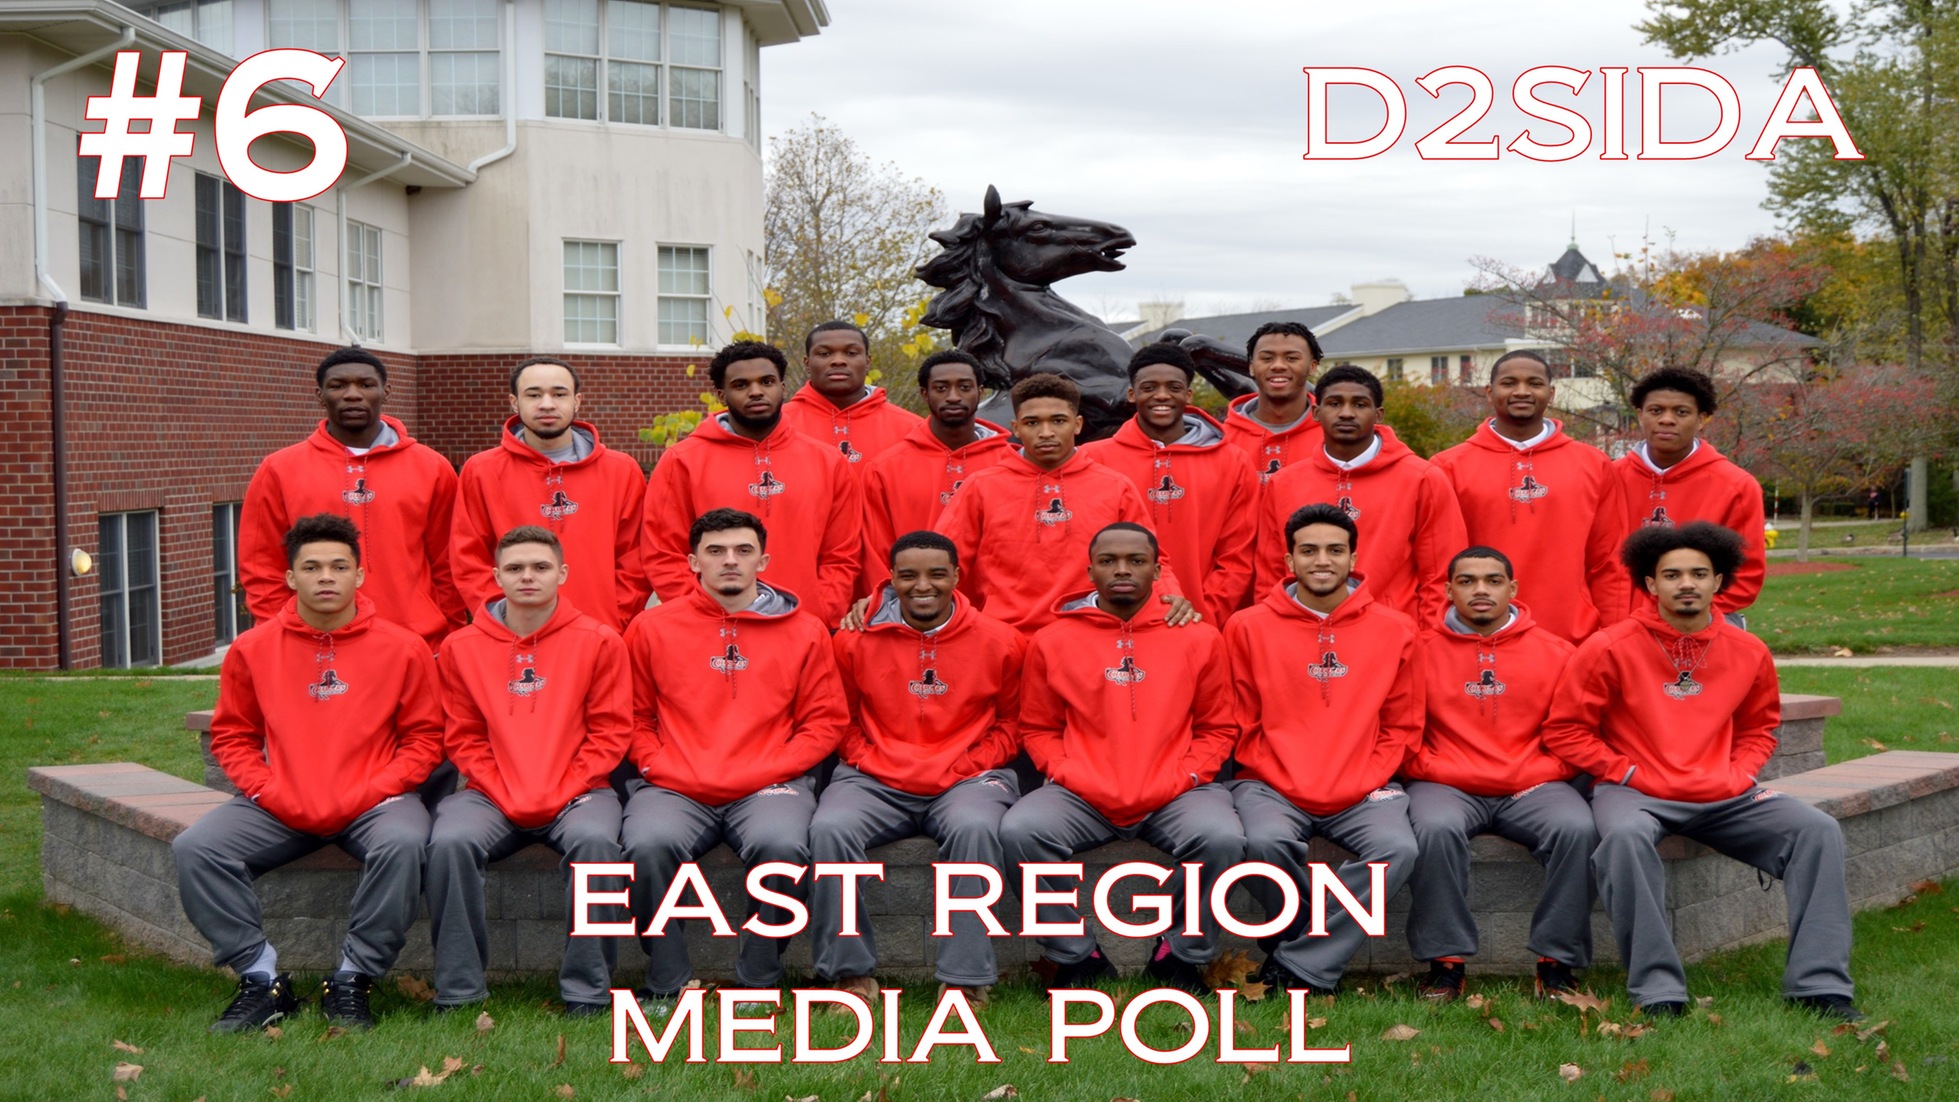 CHARGERS MOVE UP TO SIXTH IN D2SIDA EAST REGION MEDIA POLL